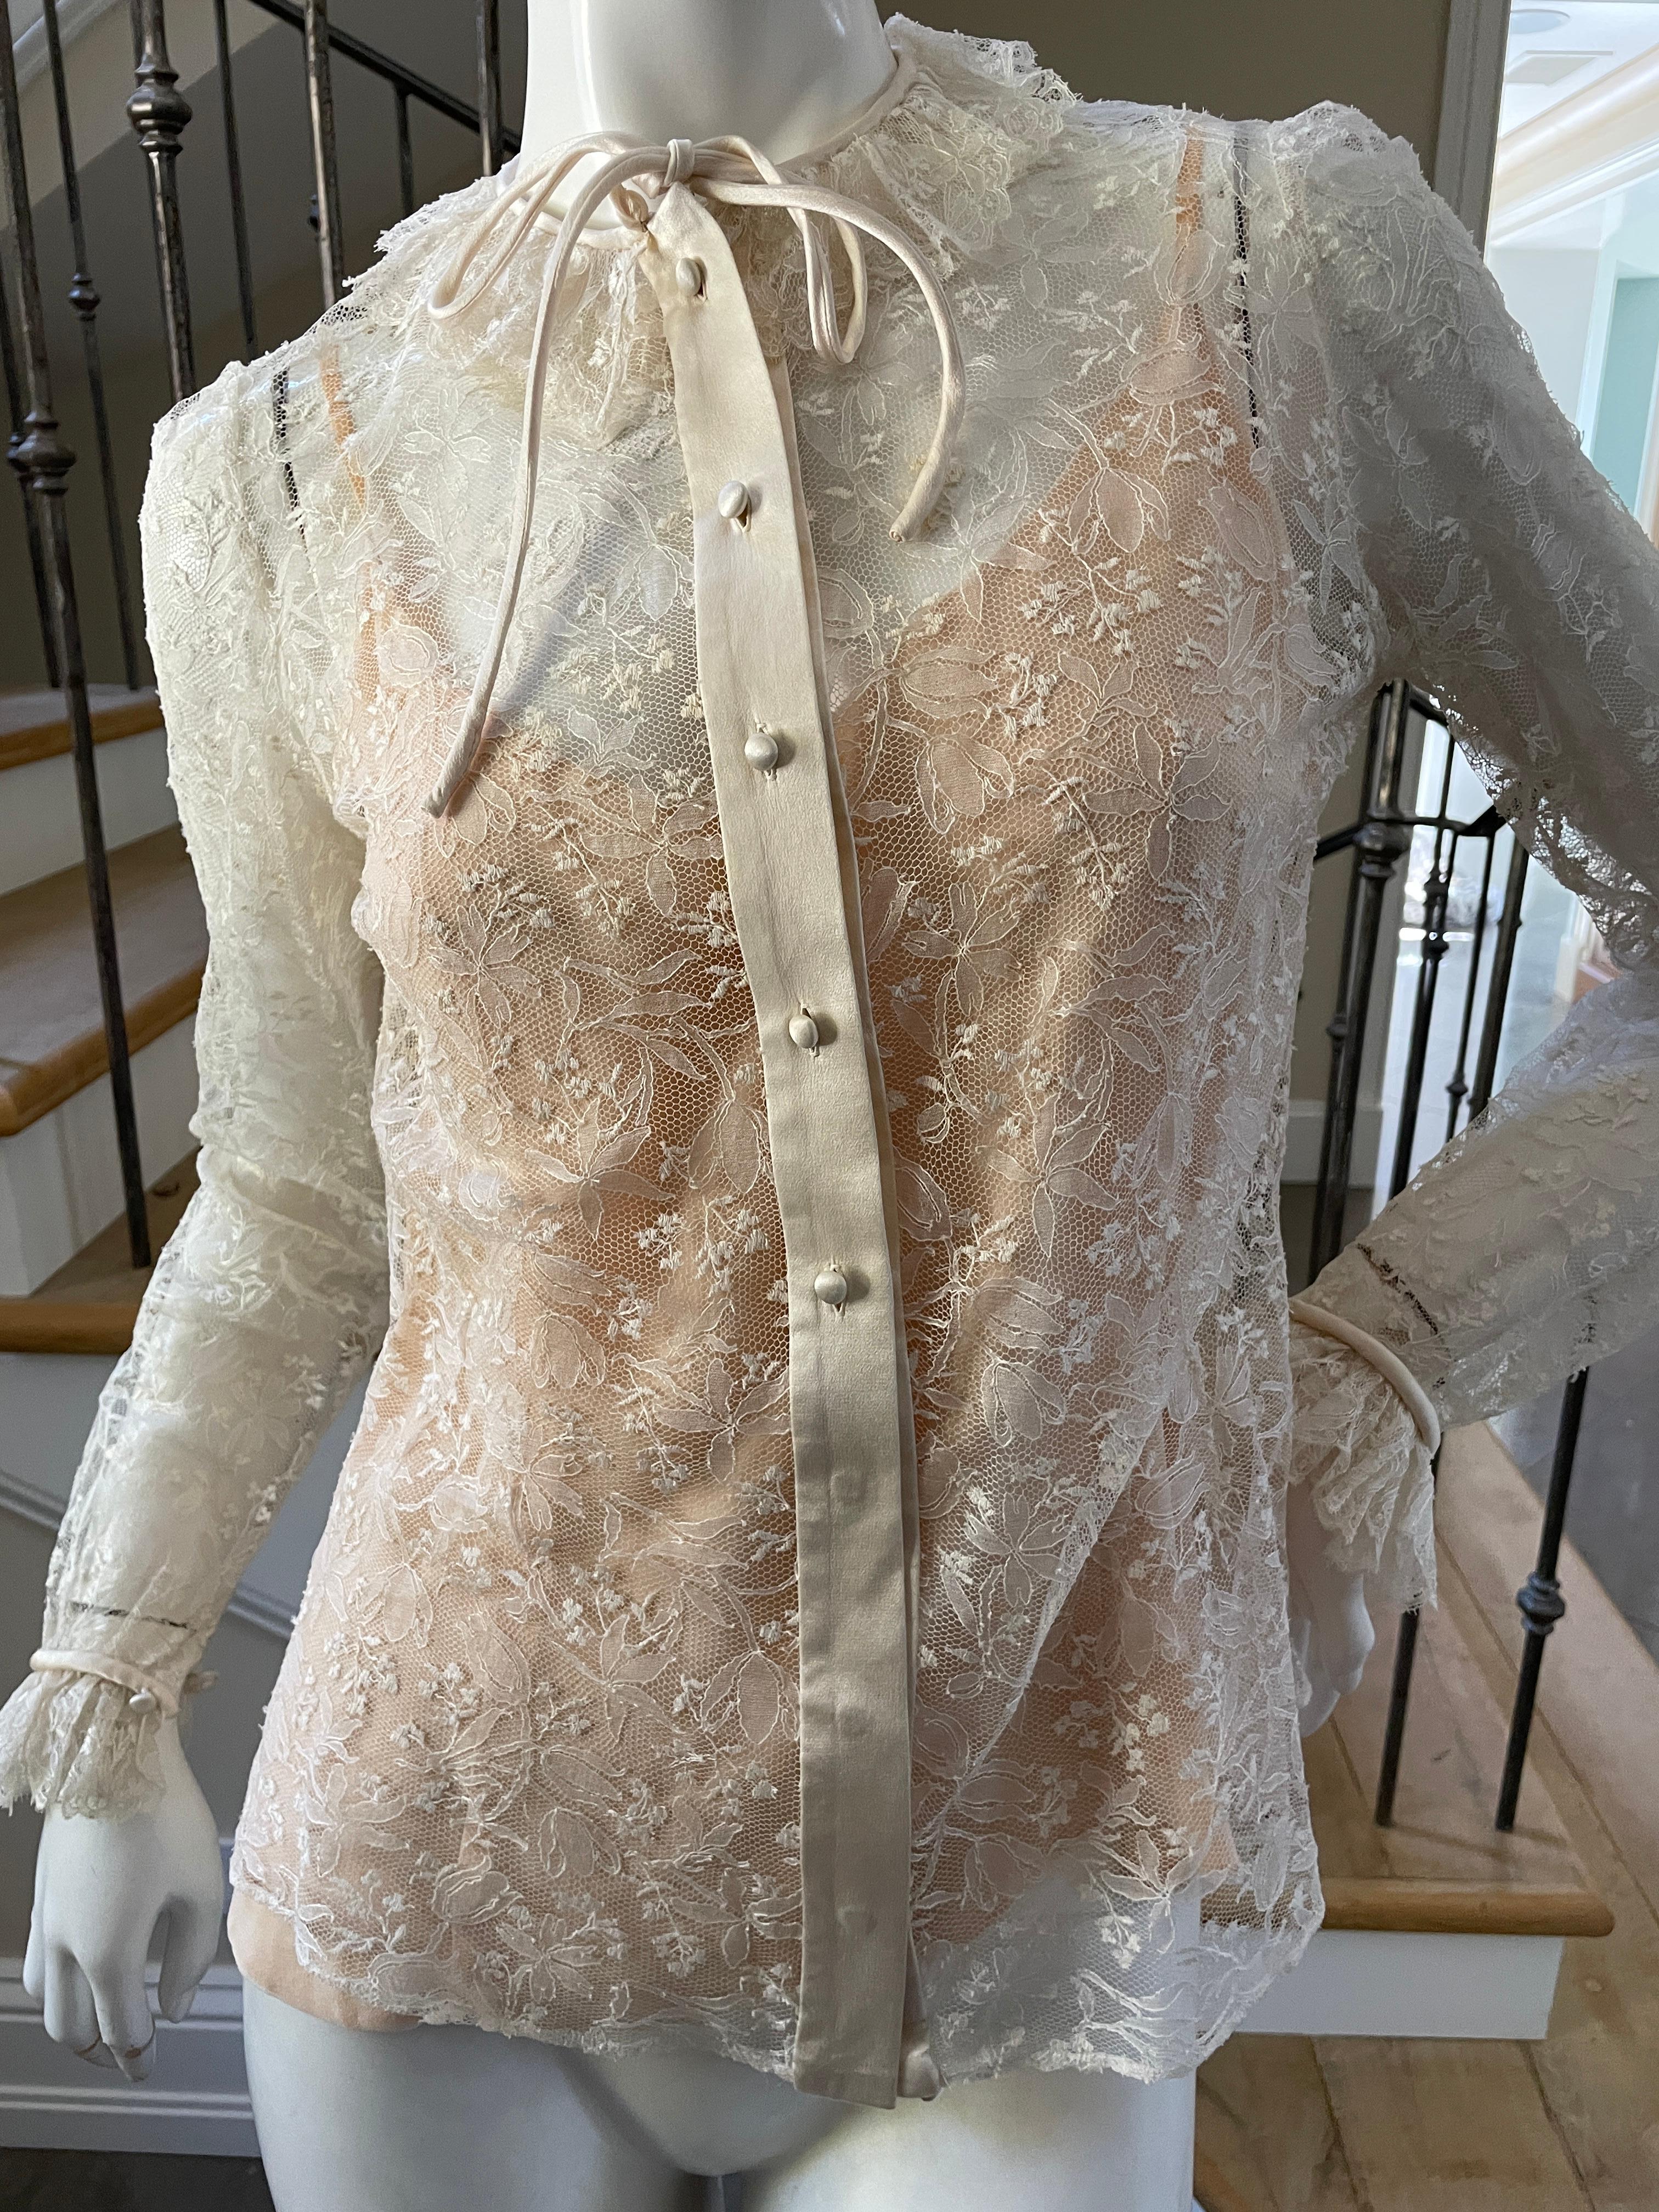 Jean-Louis Couture 1960's Sheer Lace Blouse with Ruffle Collar and Cuffs In Good Condition For Sale In Cloverdale, CA